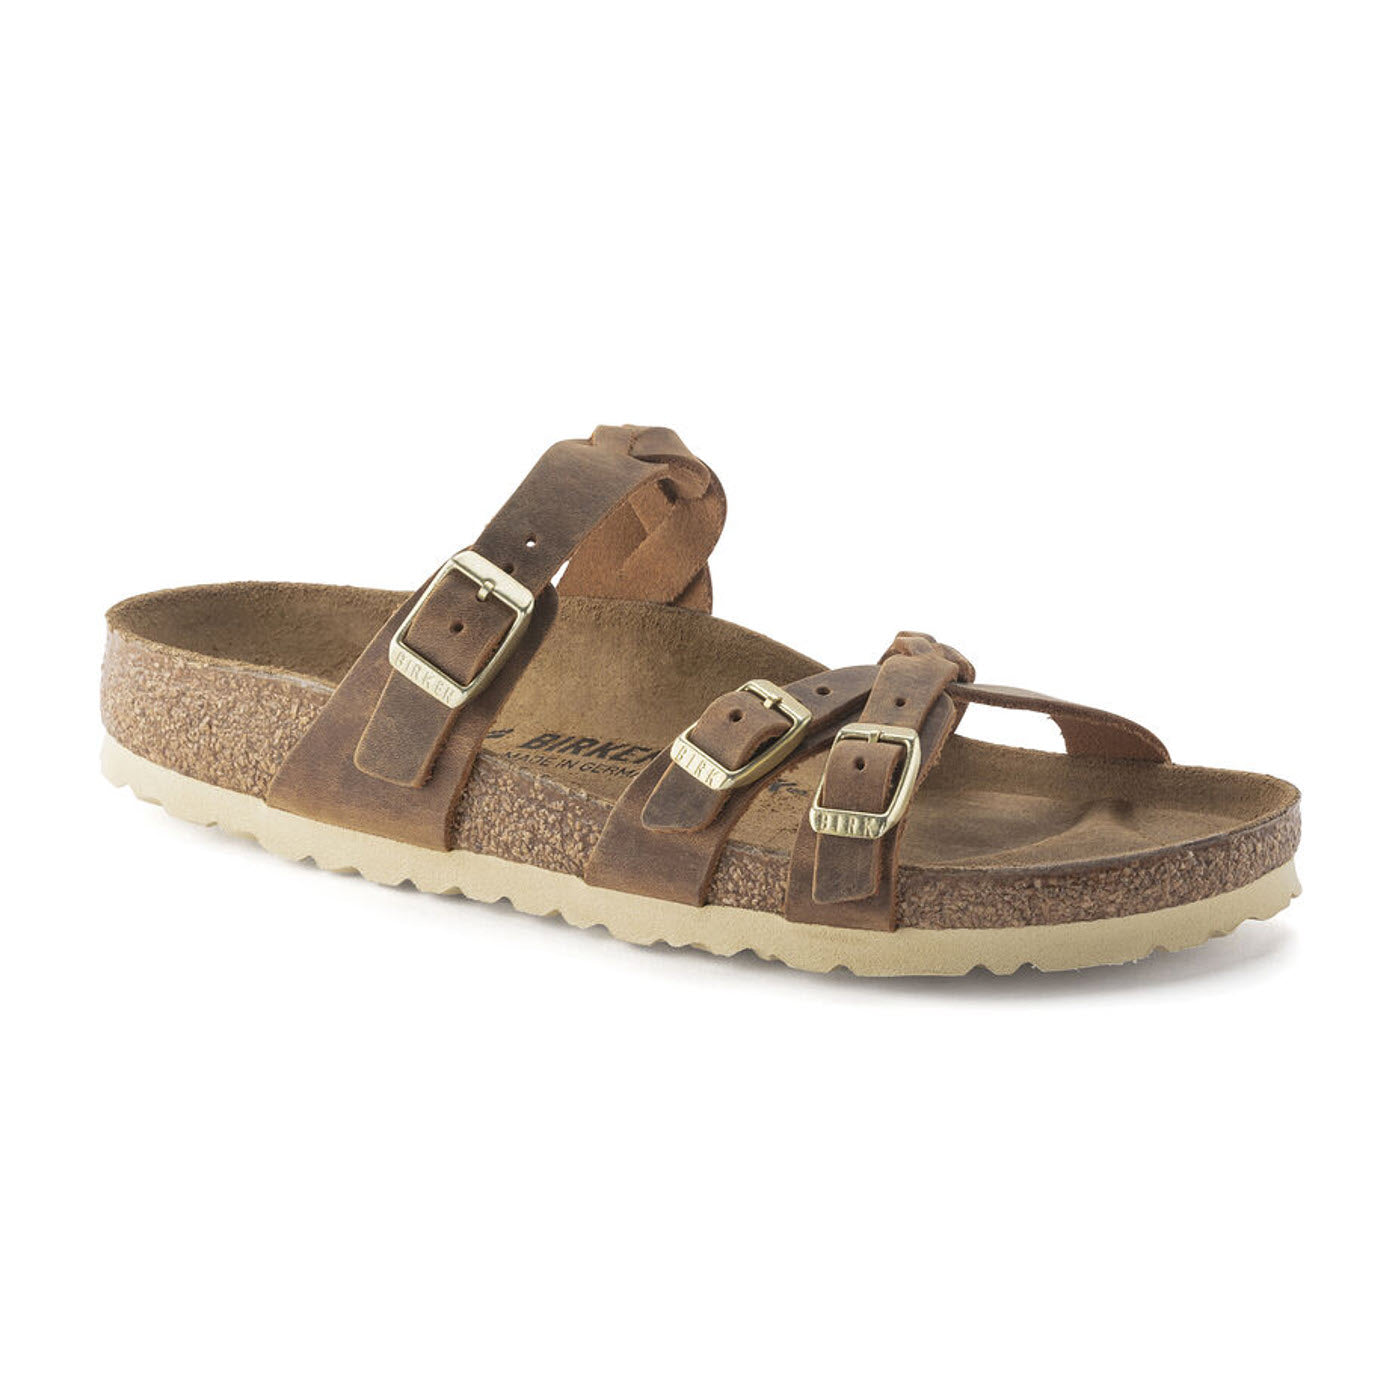 A brown Birkenstock Franca Braid Cognac oiled leather sandal with two adjustable straps and buckle closures, set against a white background.